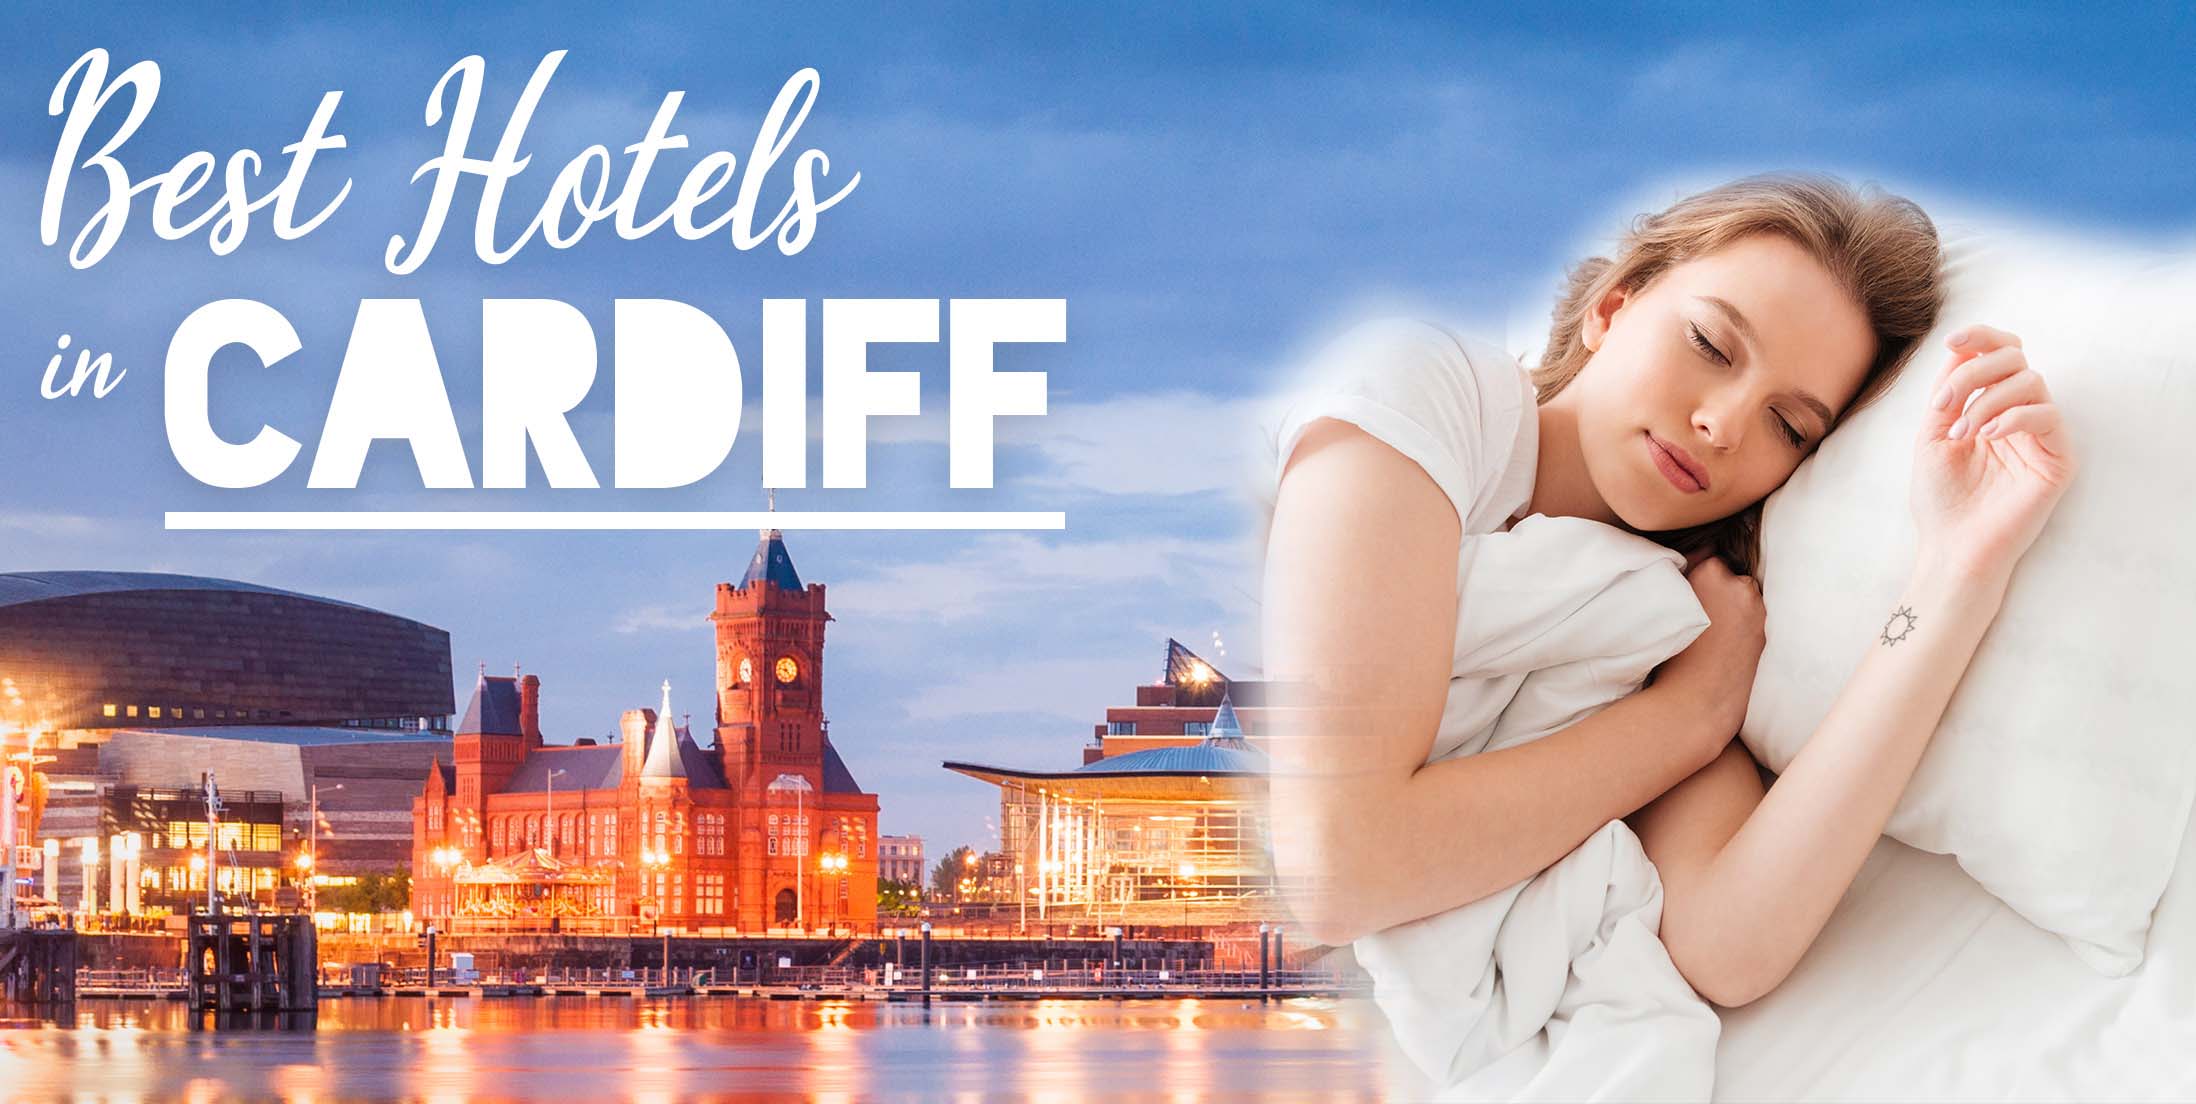 Best Hotels in Cardiff